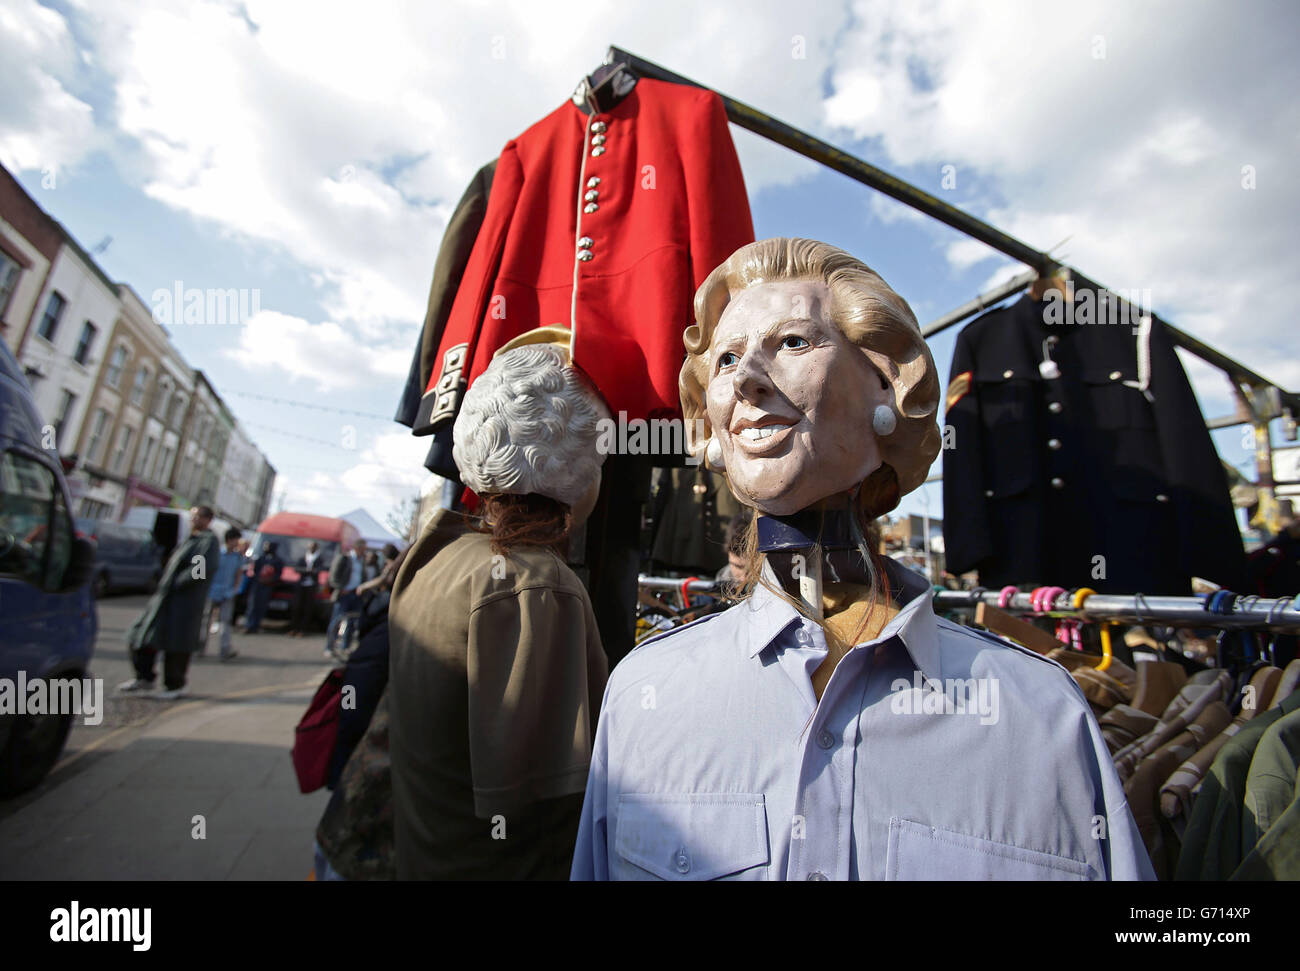 A Margaret Thatcher mask displayed on a stall at Acklam Village Market on Portobello Road, Notting Hill, London. Stock Photo